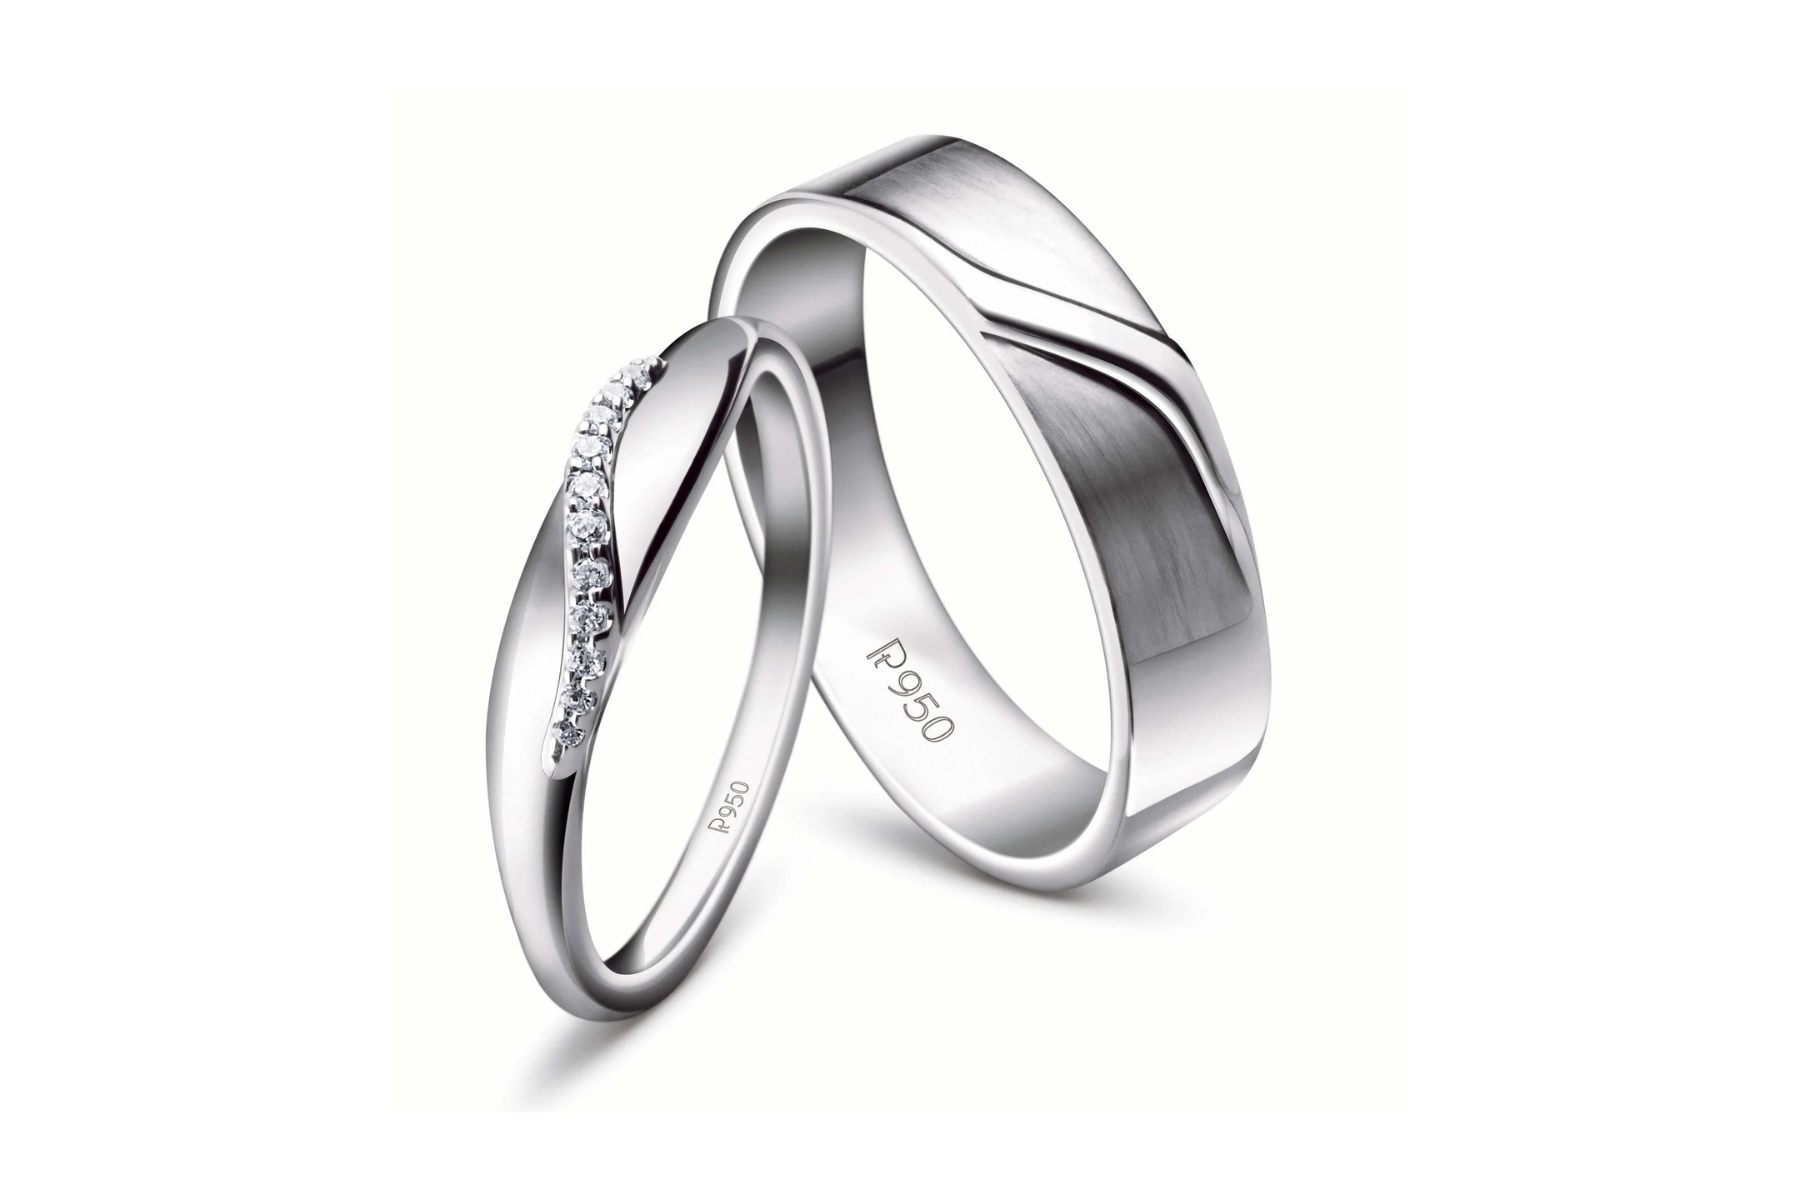 Two platinum rings raised line on the wide ring is finished in high polish, and a thin ring with diamond bits